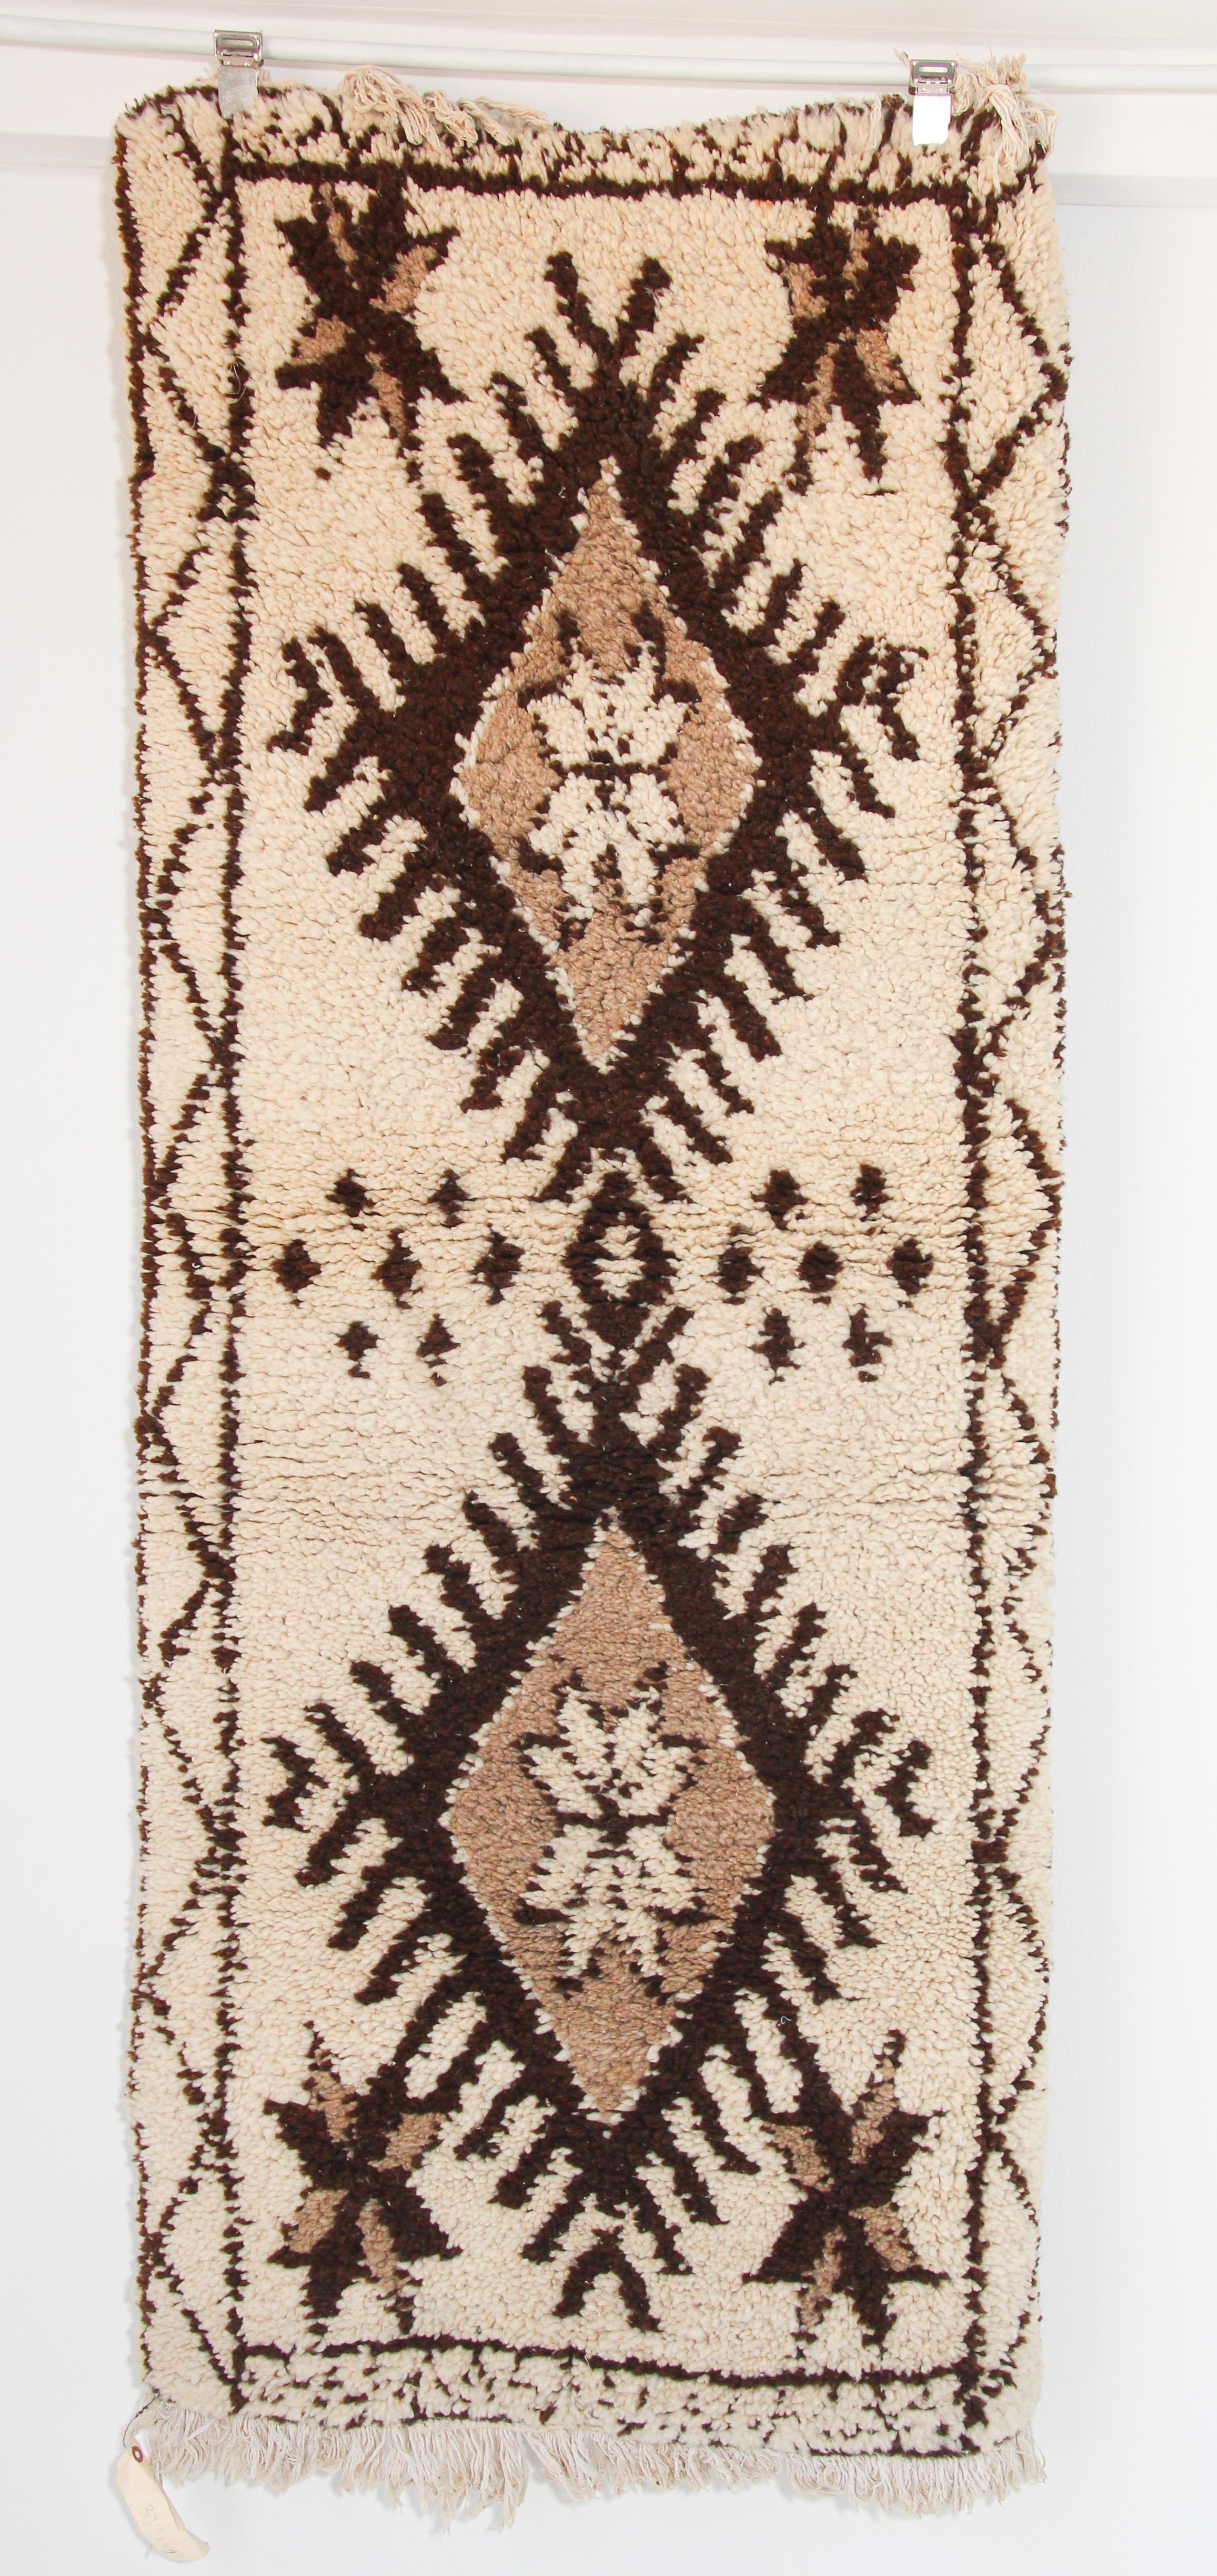 Wonderful example of Moroccan Berber textile weaving from the high atlas region.
Beautiful Azilal tribal African rug from Morocco, handcrafted from wool and cotton.
This Moroccan runner features contemporary abstract geometrical designs, vibrant and